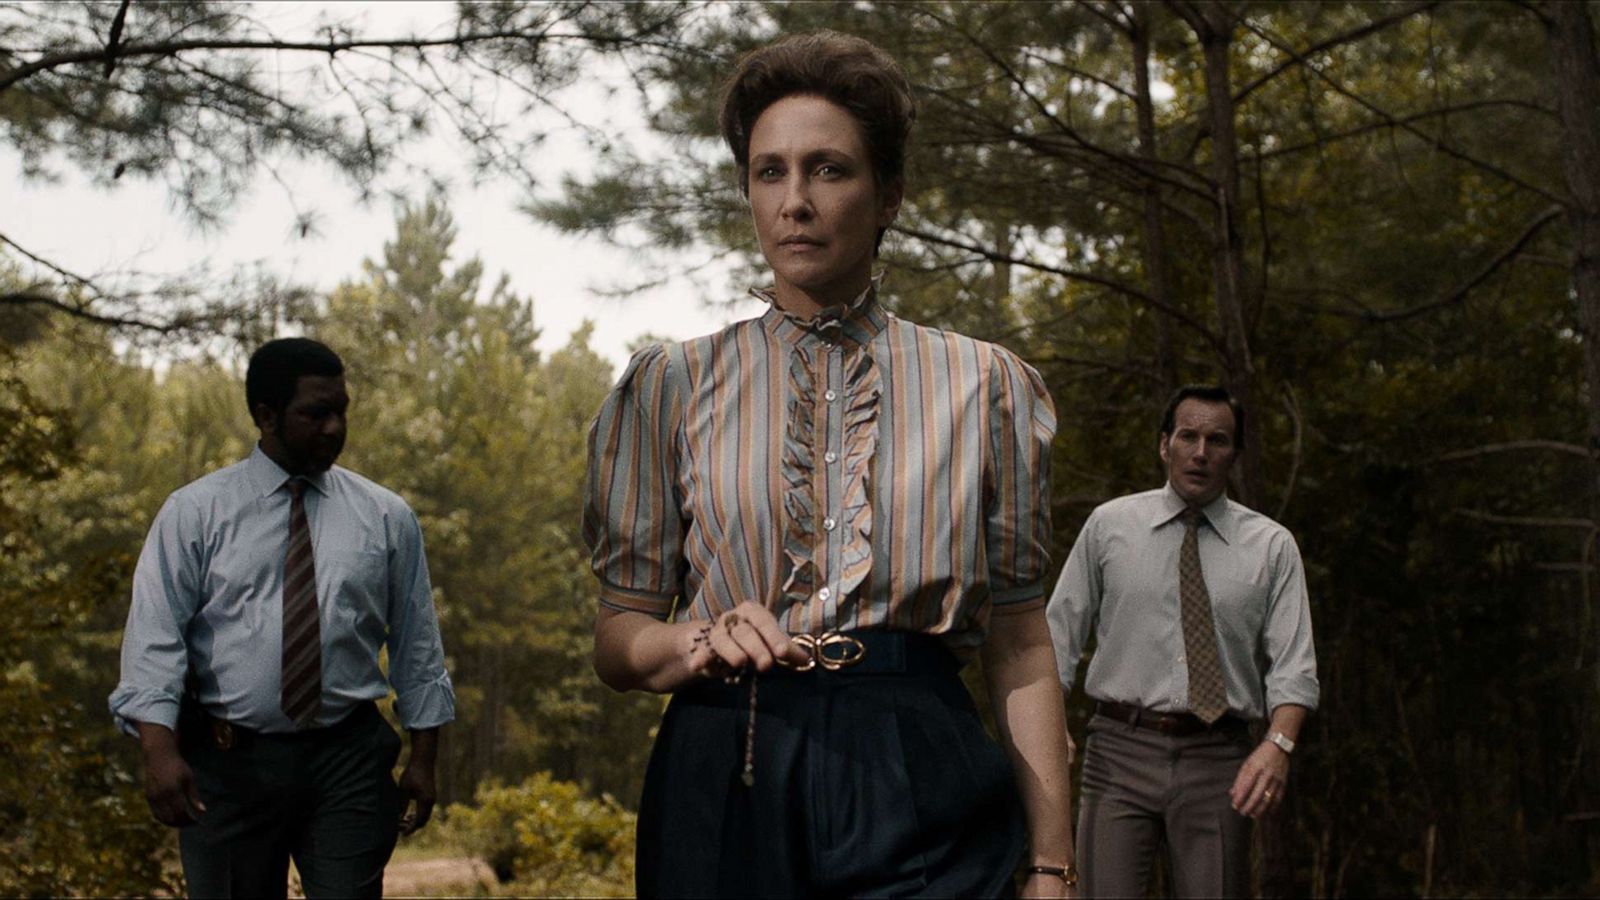 Review: 'The Conjuring: The Devil Made Me Do It' brings nerve